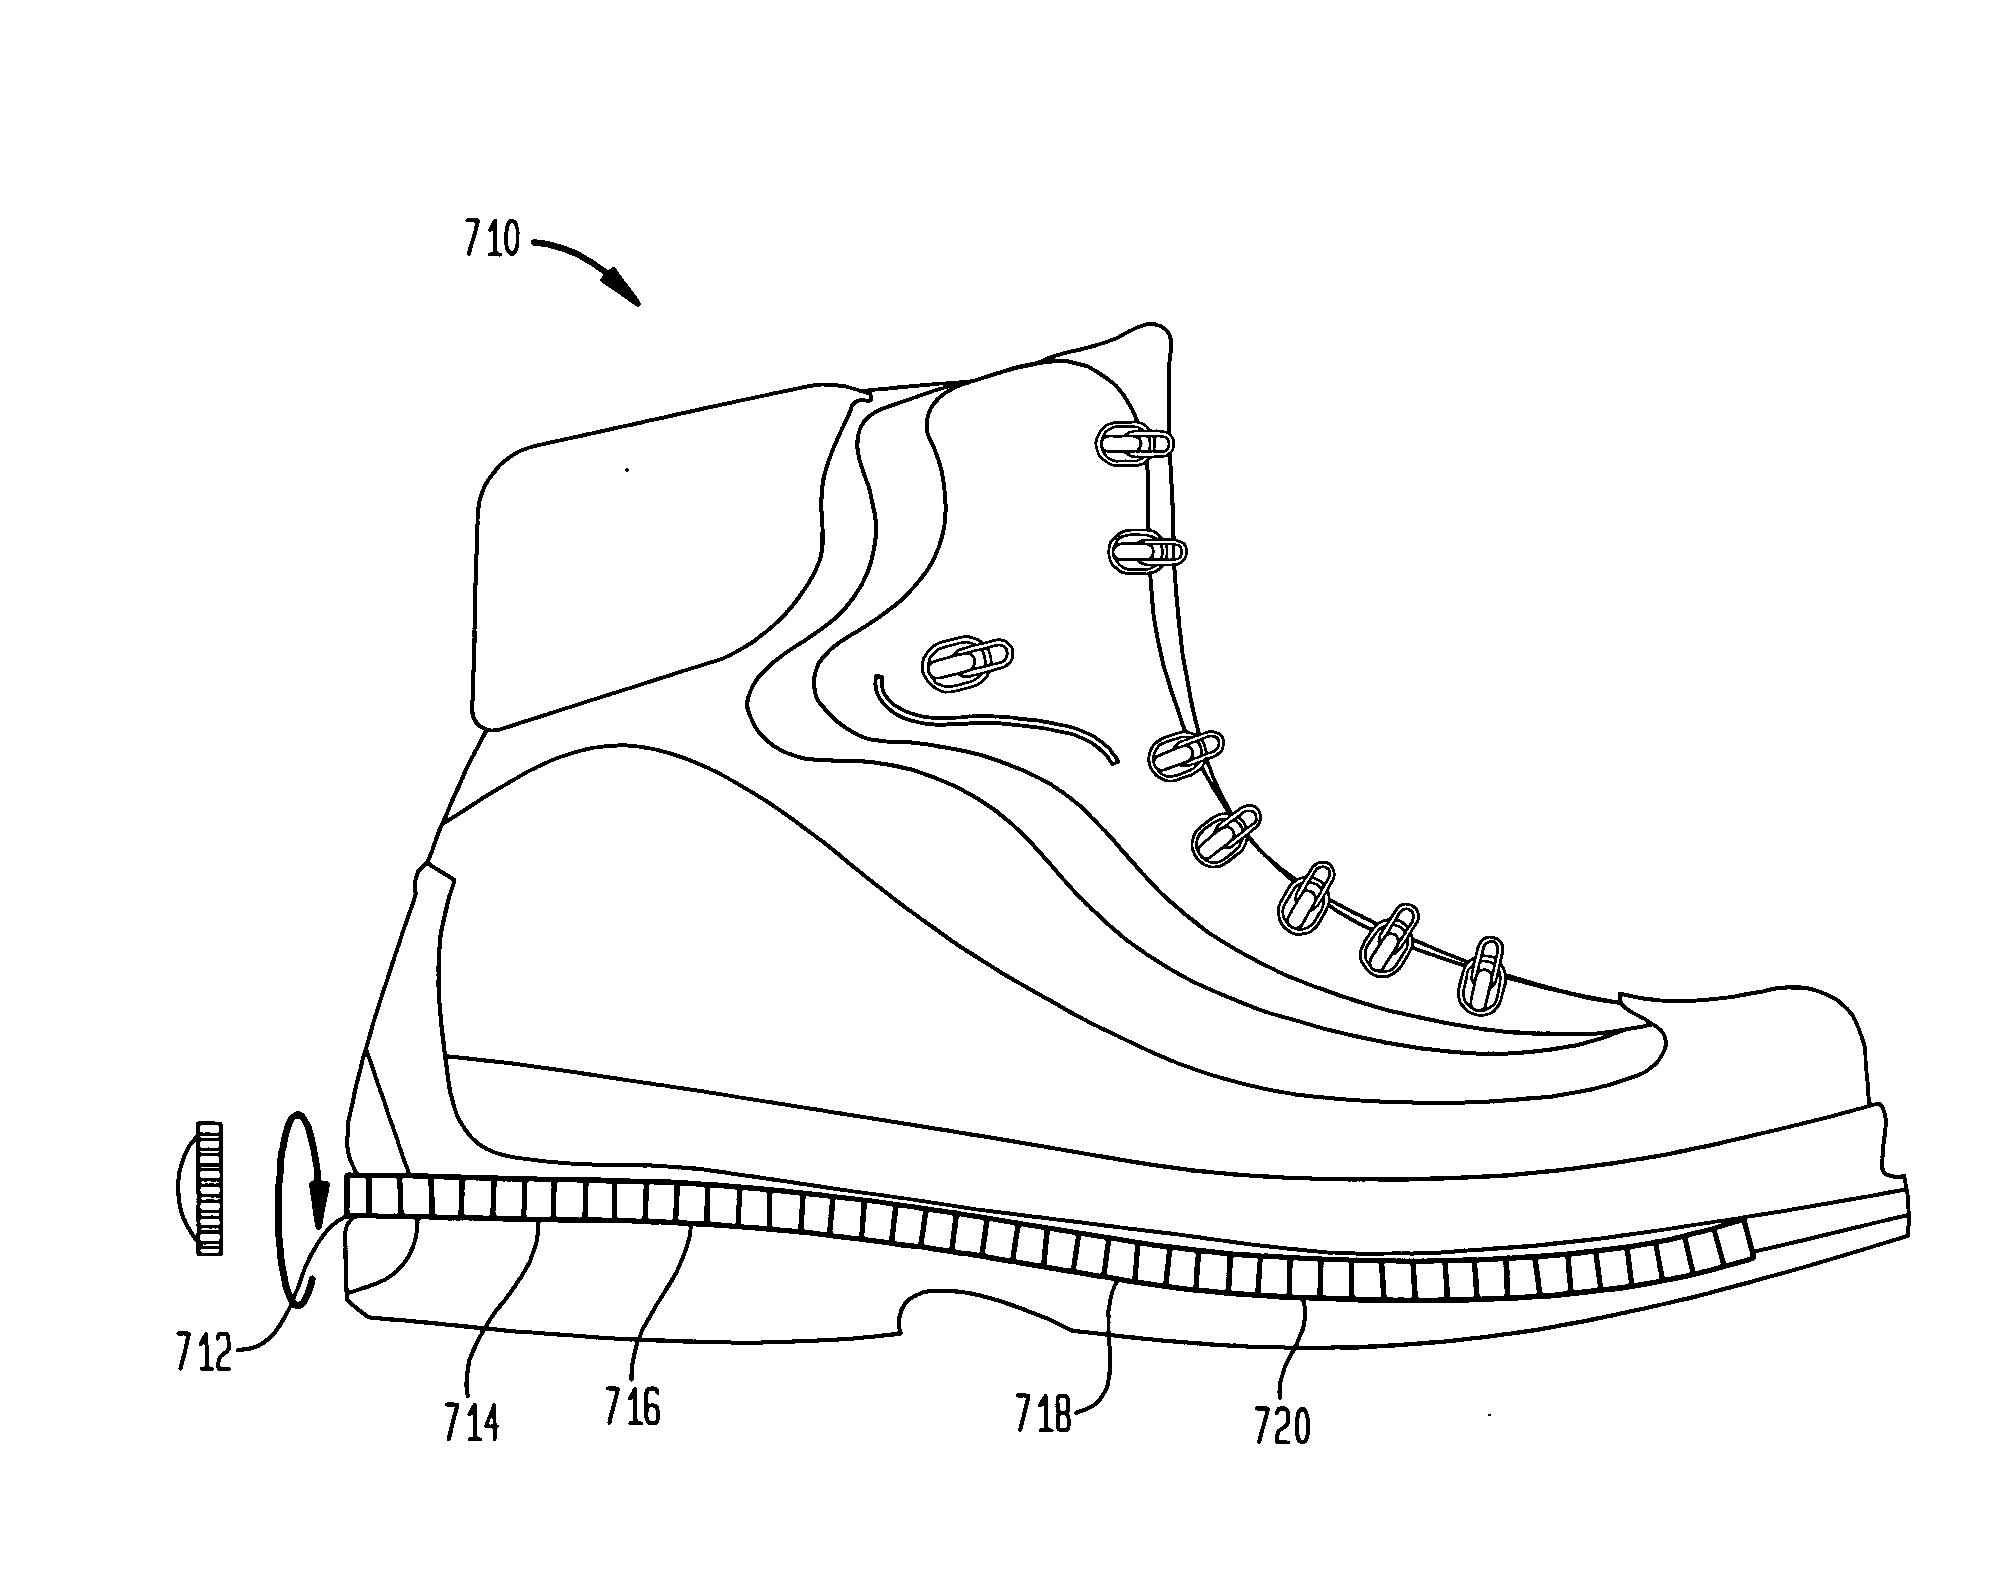 Footwear article with adjustable stiffness